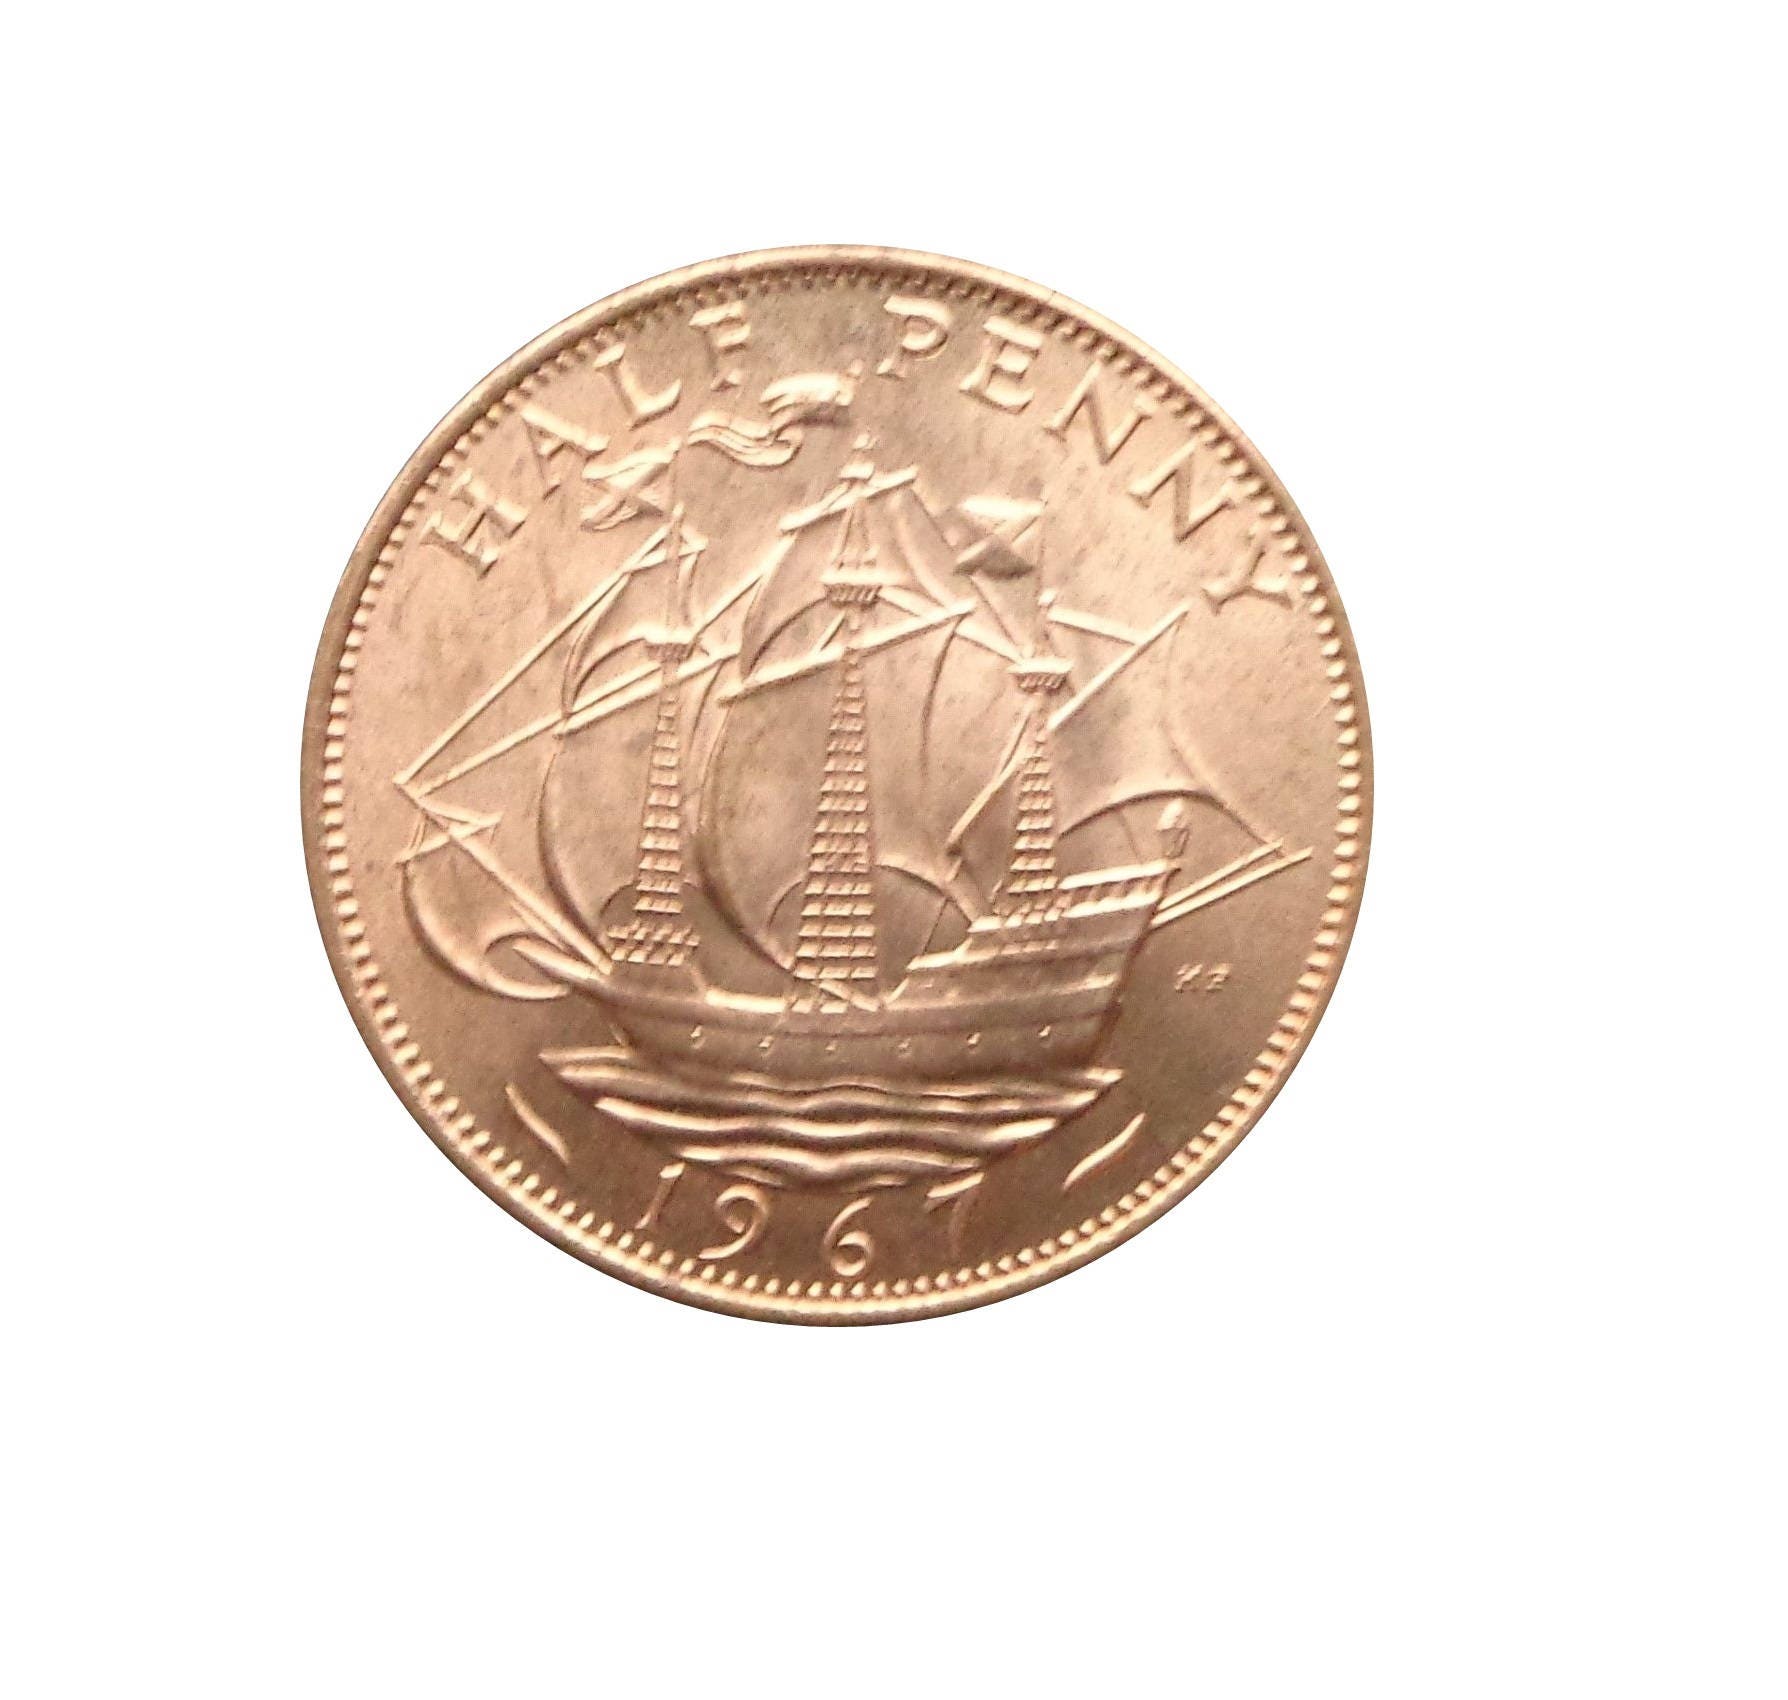 430 old world coin GREAT BRITAIN half 1/2 penny 1967 KM896 Golden Hind ship